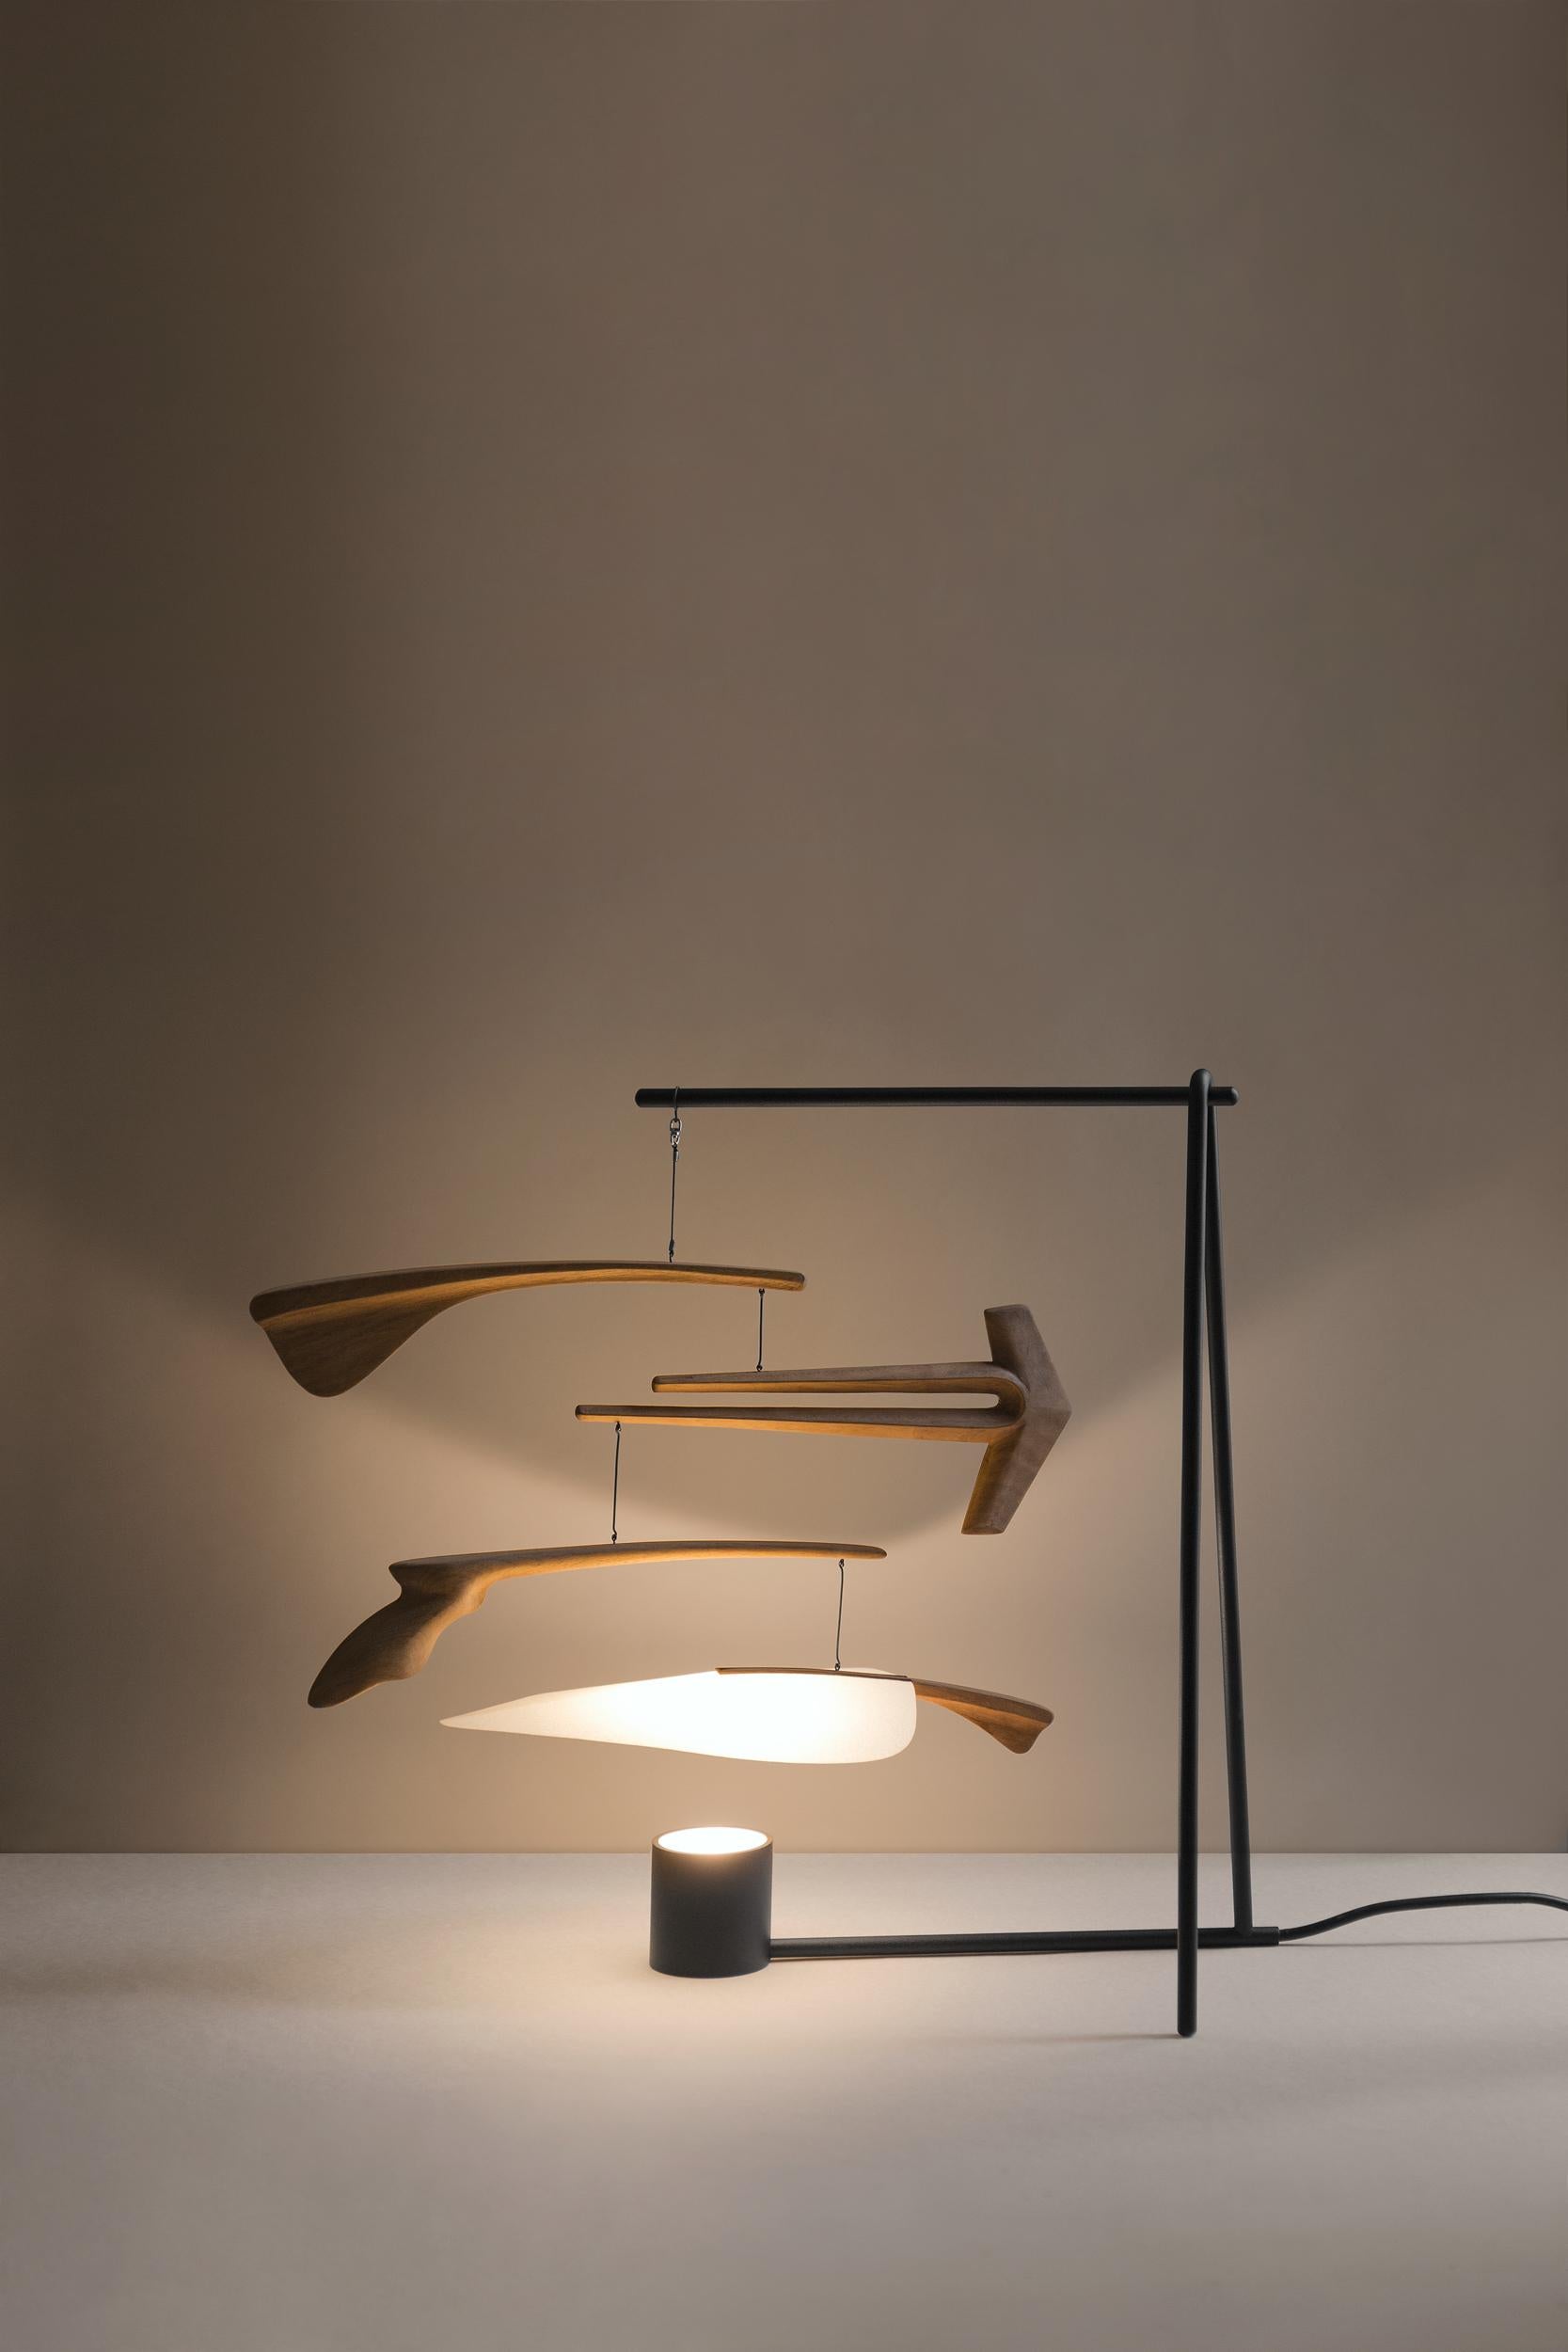 Natural Óseo - Mobile lamp by Federico Stefanovich
Dimensions: 45 x 47 x H 45 cm
Material: Solid inked oak wood with a high solid oil finish. Screens made of nitrocellulose coated paper. Structure made of powder coated steel.
Also available in